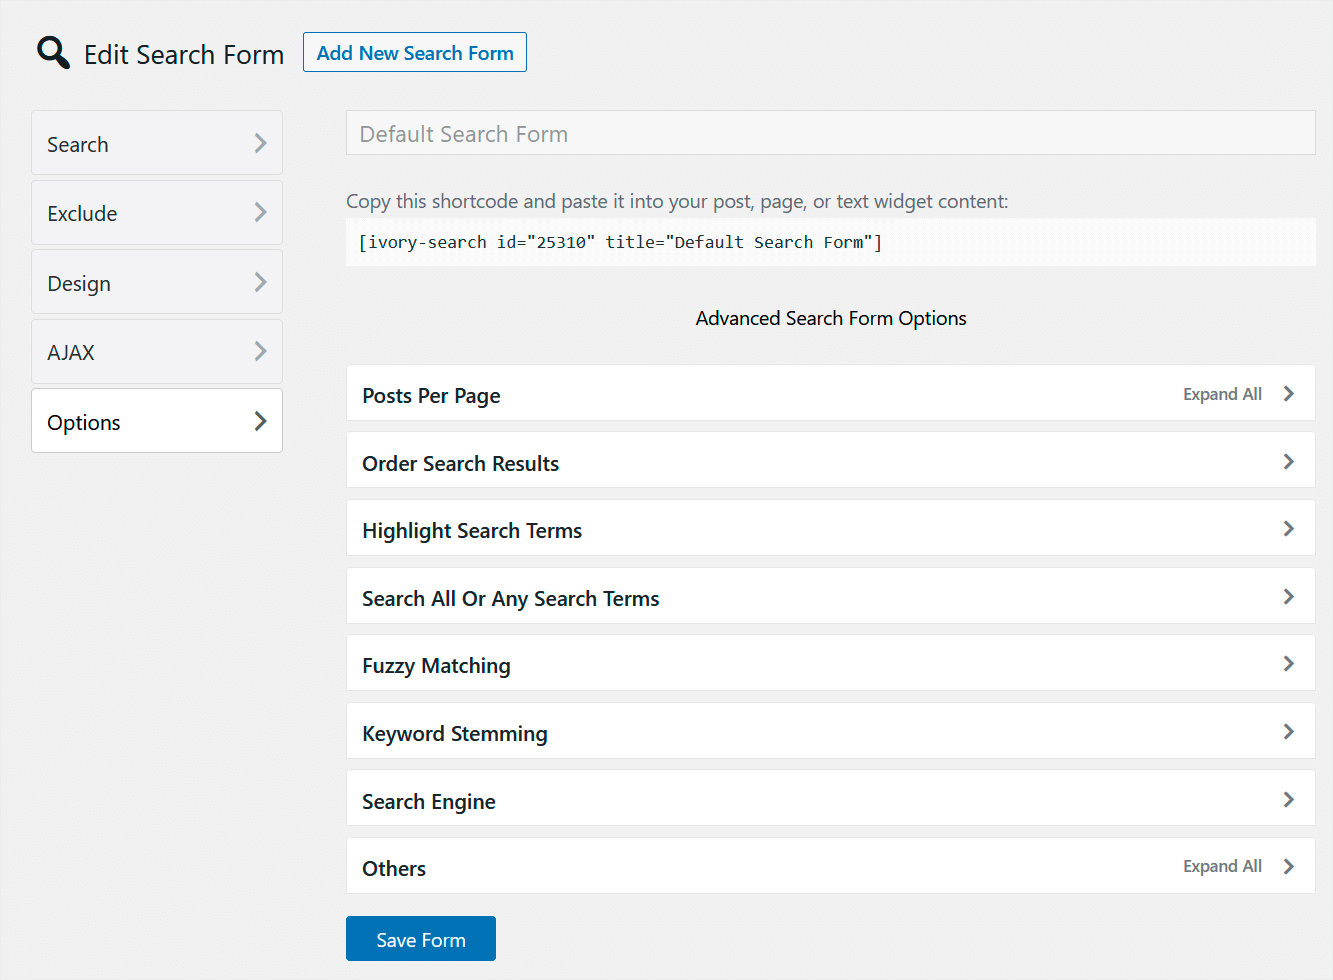 edit your search form